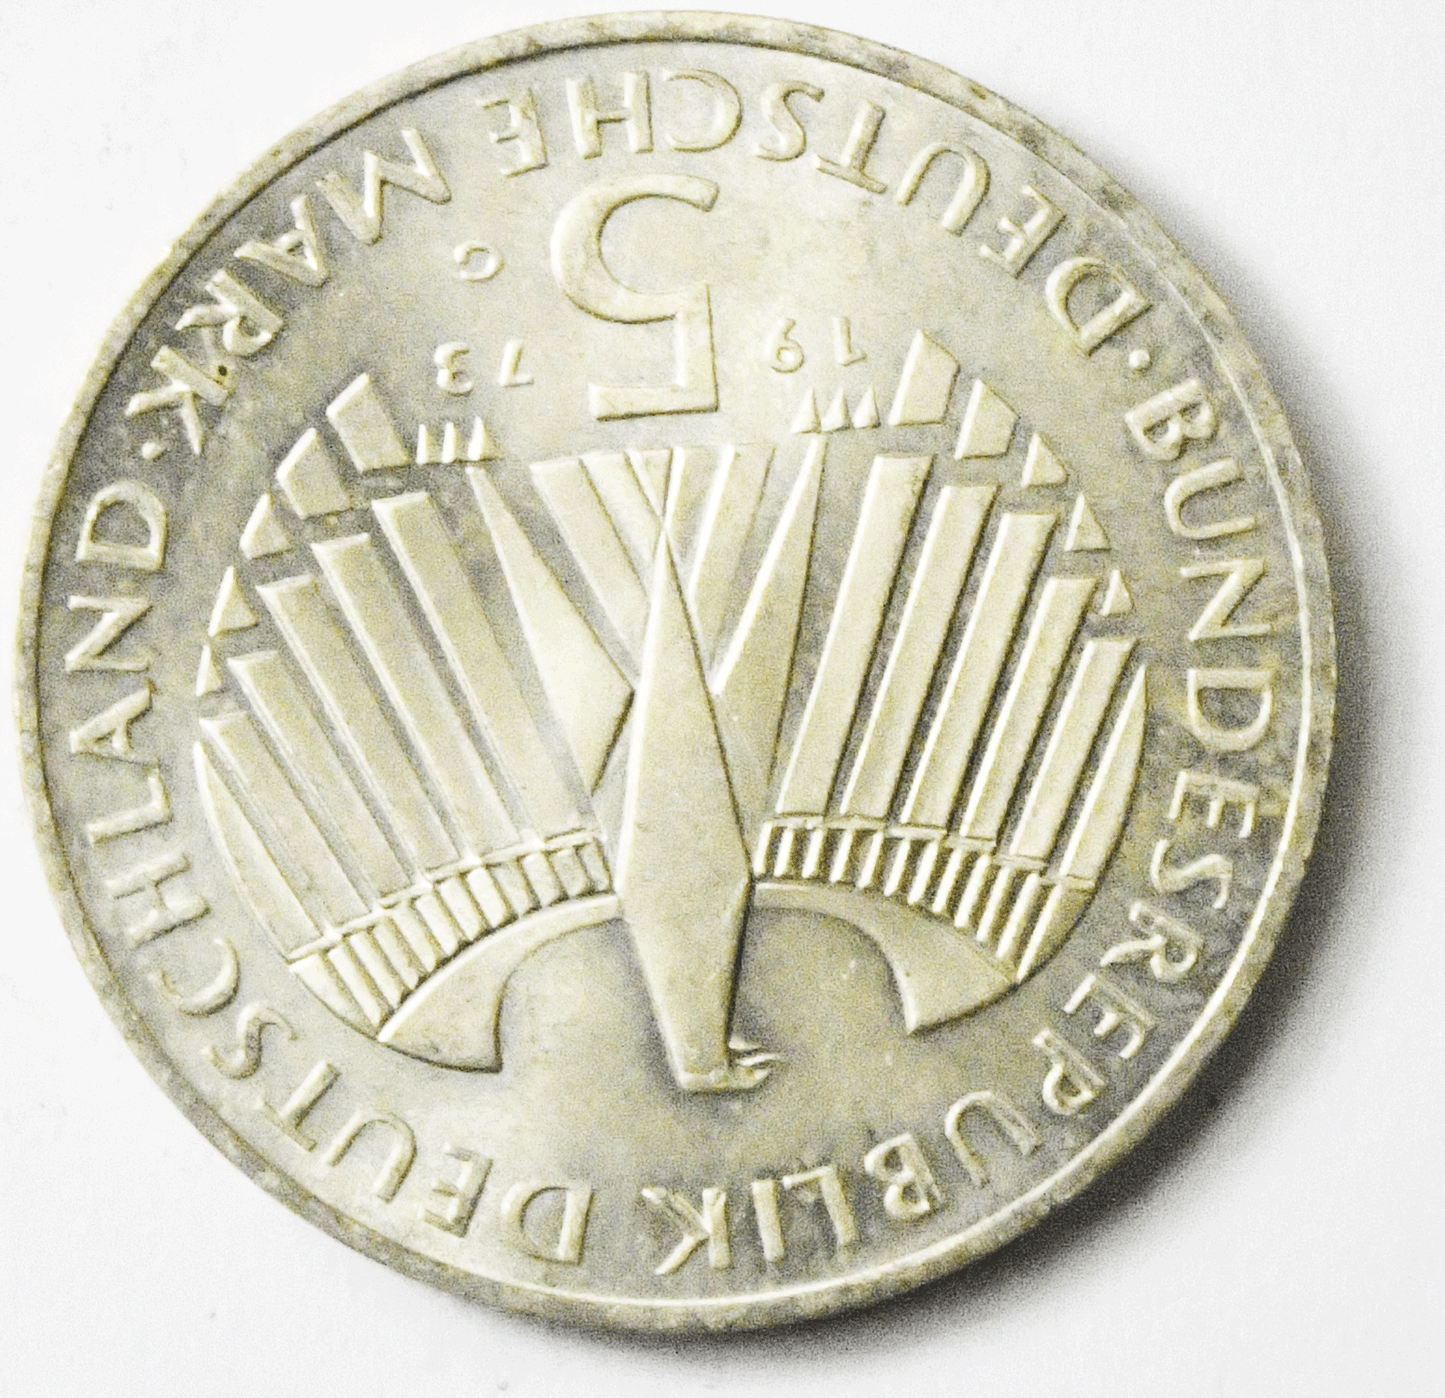 1973 G Germany Federal Republic 5 Five Mark Silver Coin KM#137